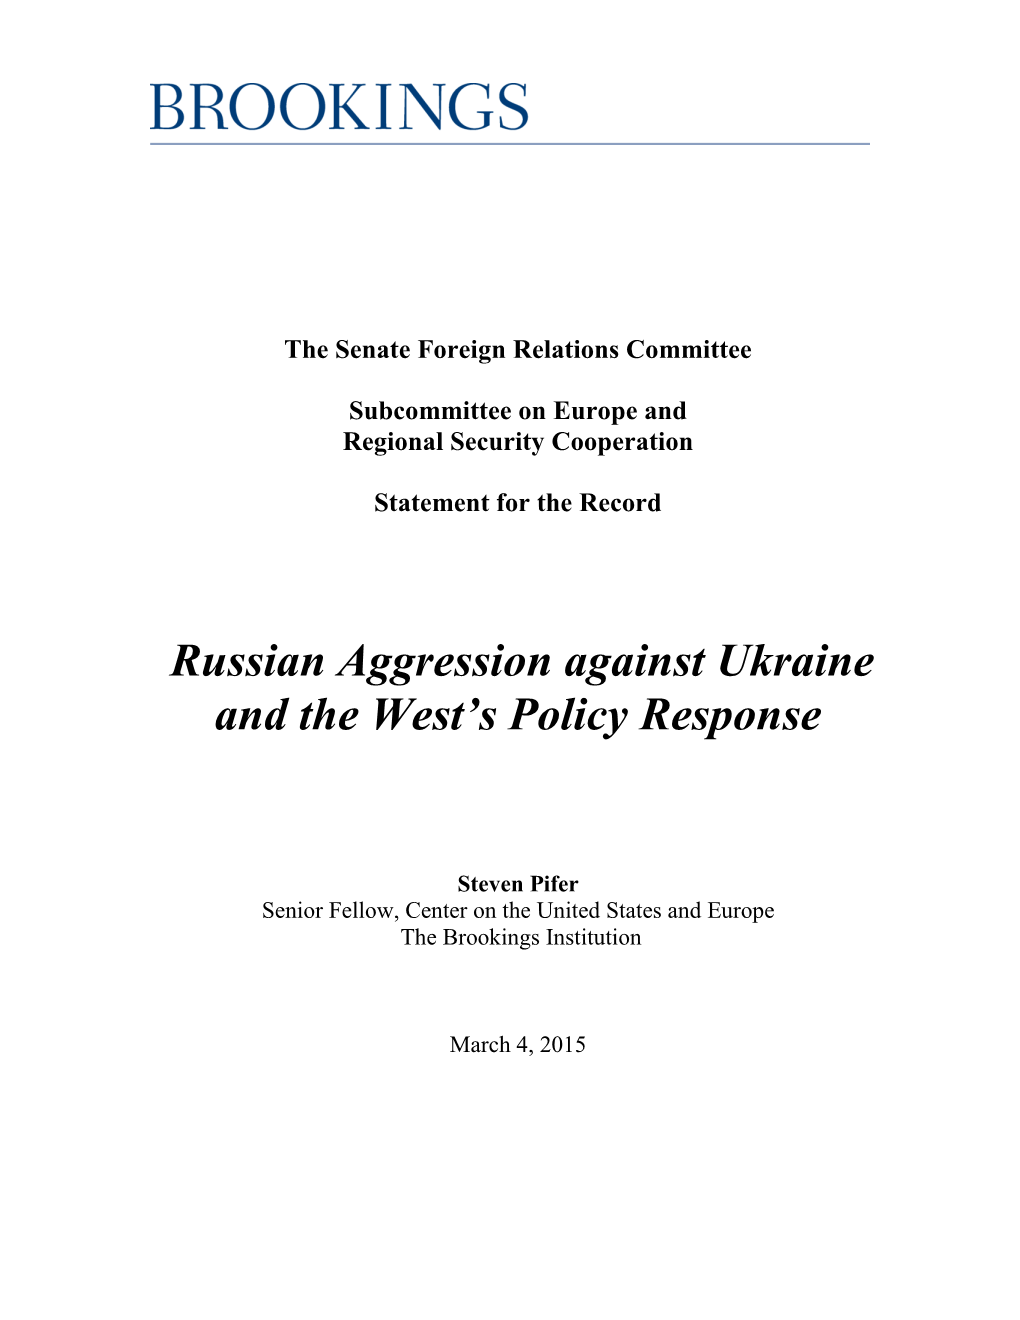 Russian Aggression Against Ukraine and the West’S Policy Response